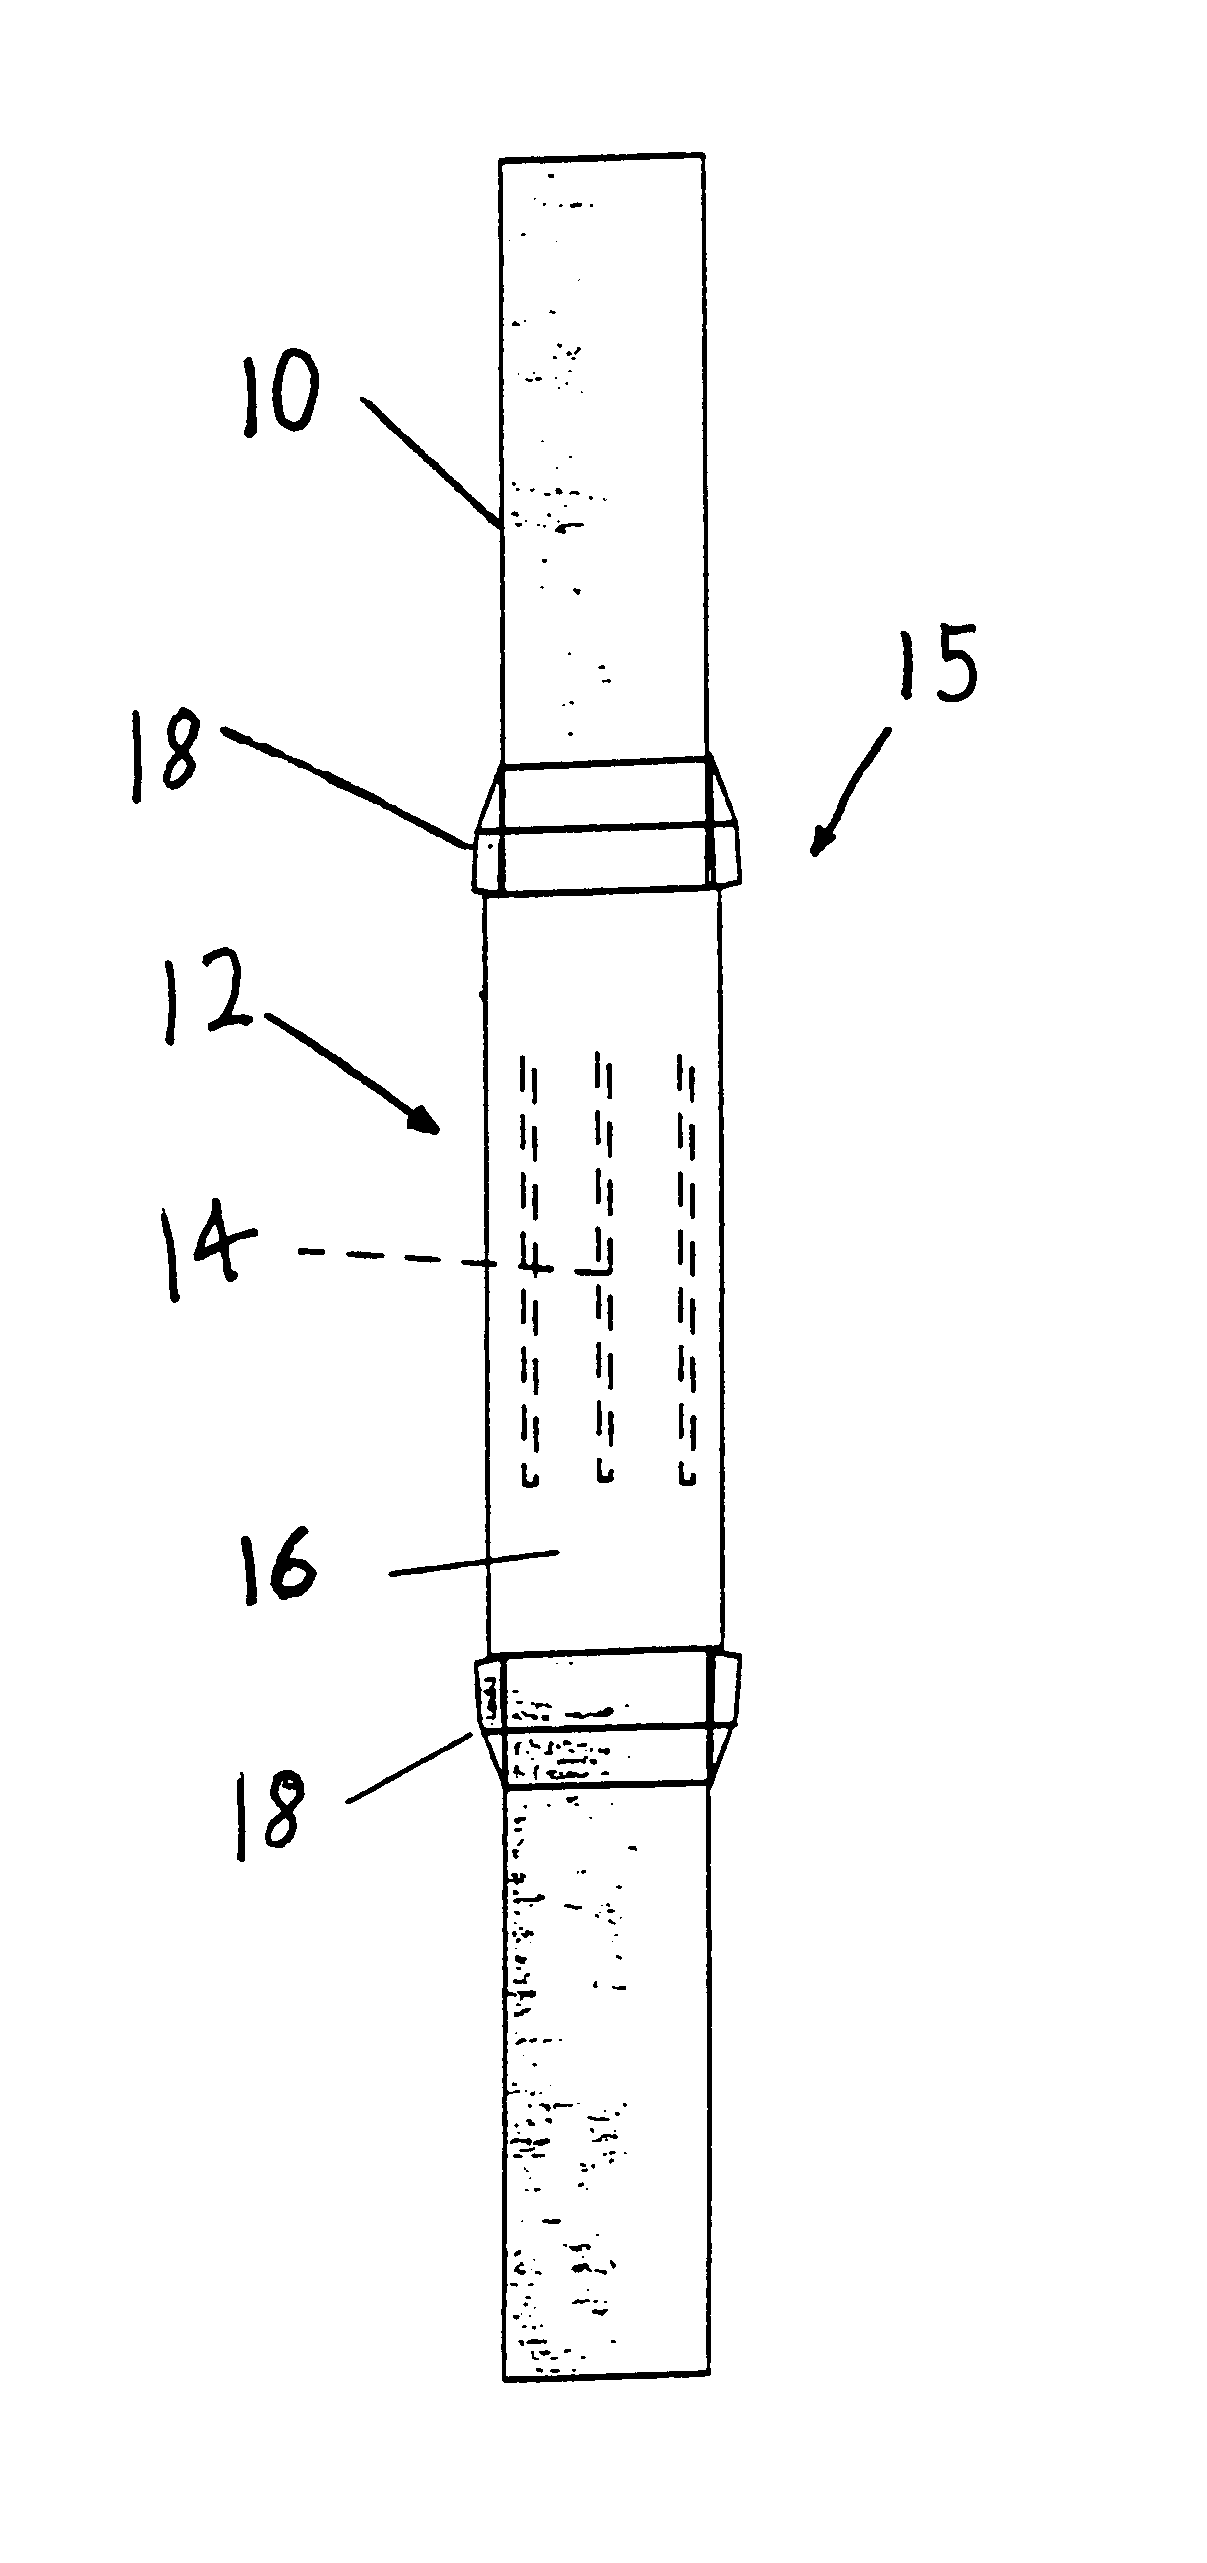 Subsurface monitoring and borehole placement using a modified tubular equipped with tilted or transverse magnetic dipoles